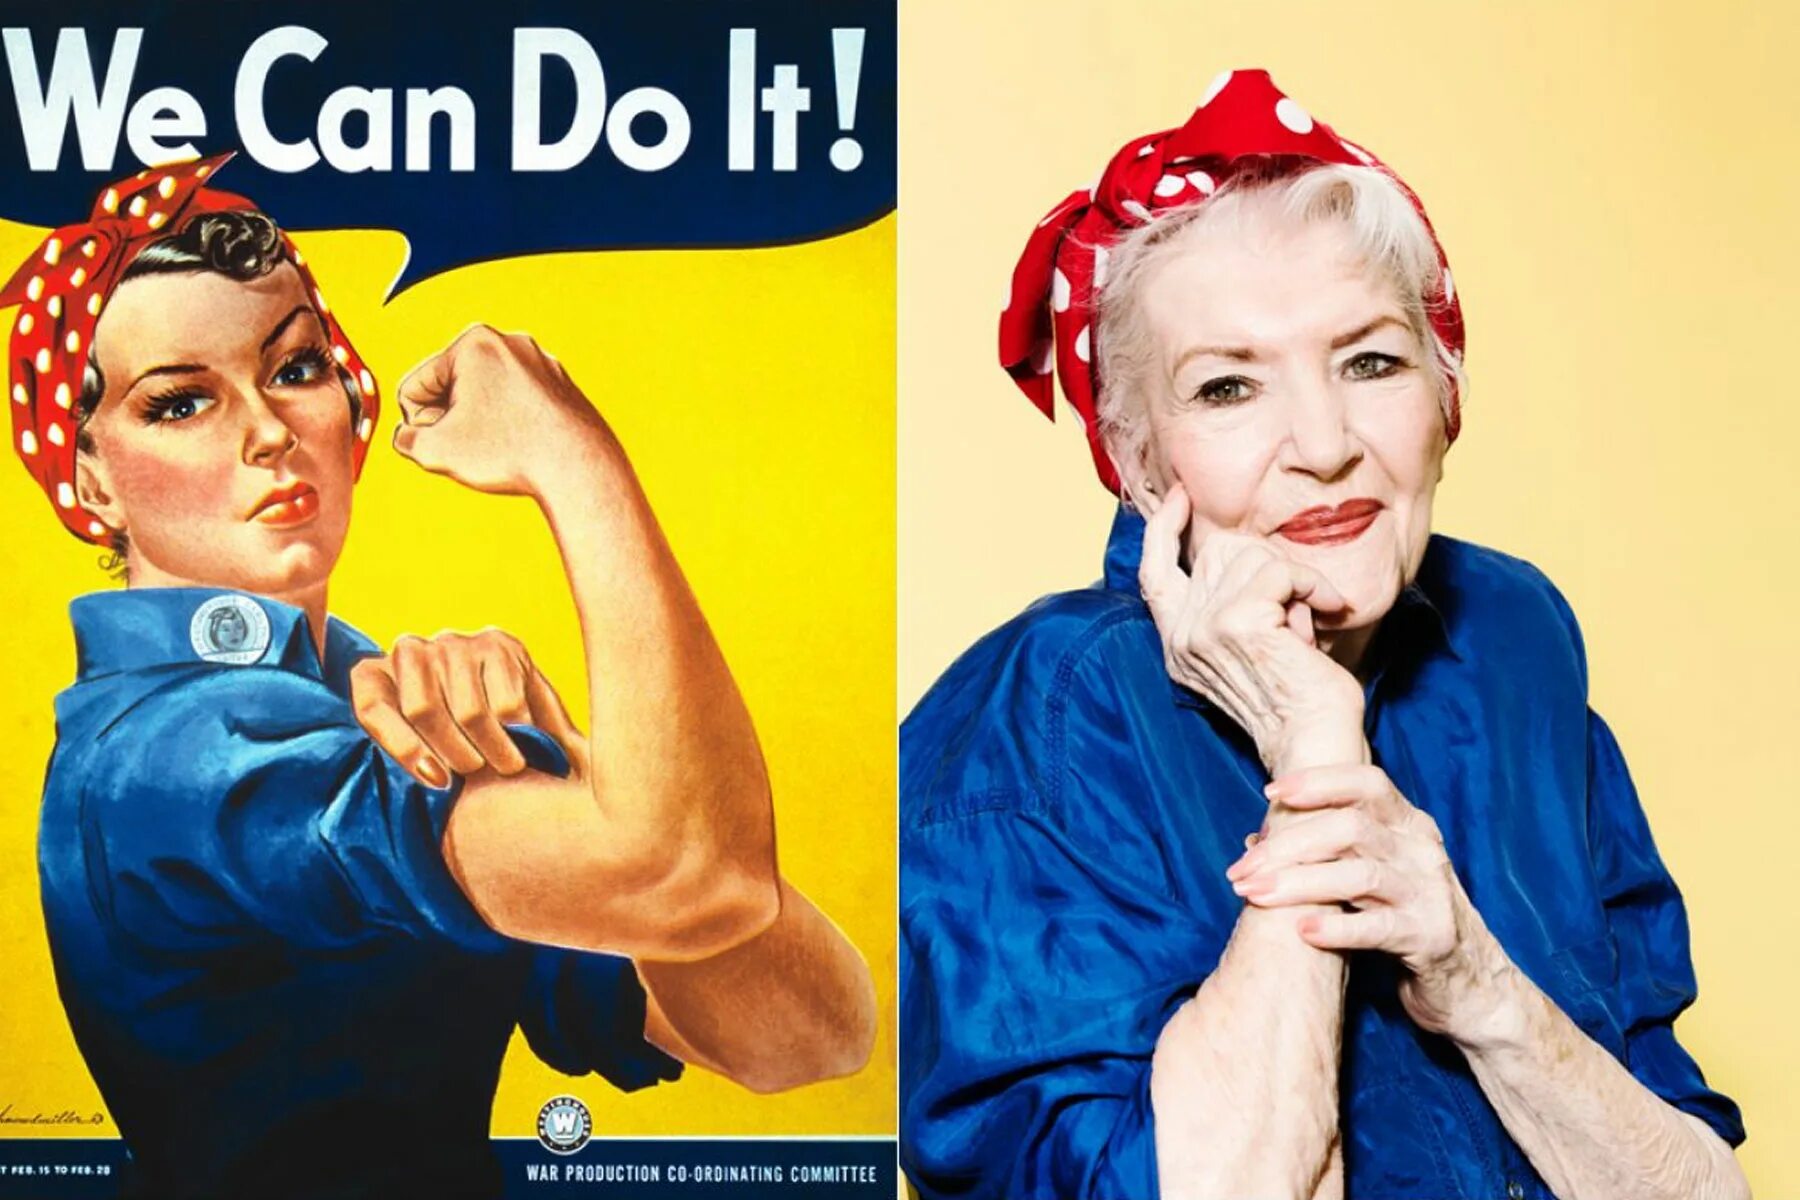 We could face. Рози Клепальщица Рокуэлл. Клепальщицы Рози (Rosie the Riveter). Клепальщица Рози плакат.